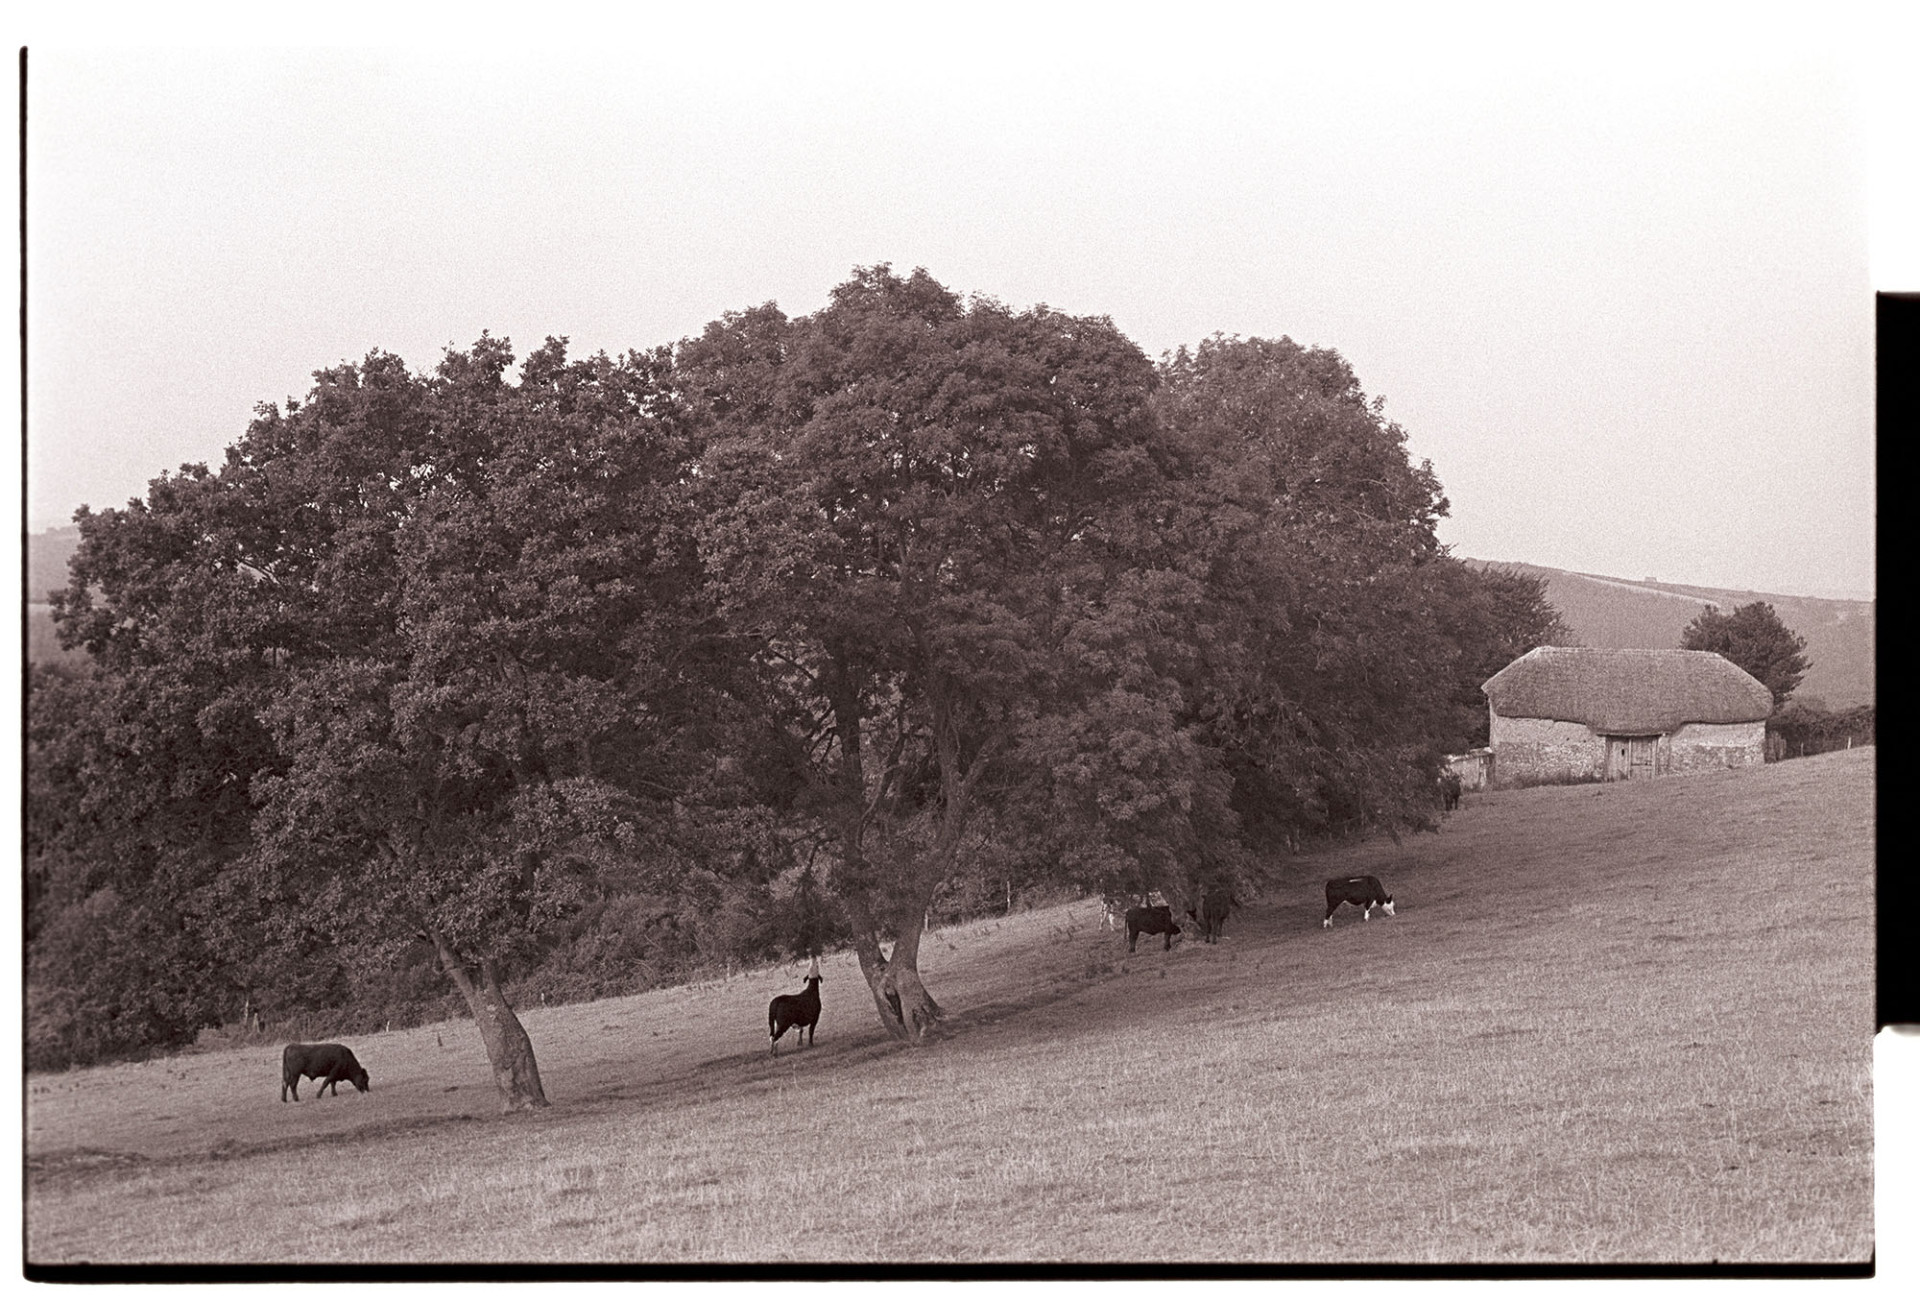 Thatch and cob barn with cattle under trees.
[A thatched cob barn with cattle grazing under trees in a field at Beaford Wood, Beaford.]